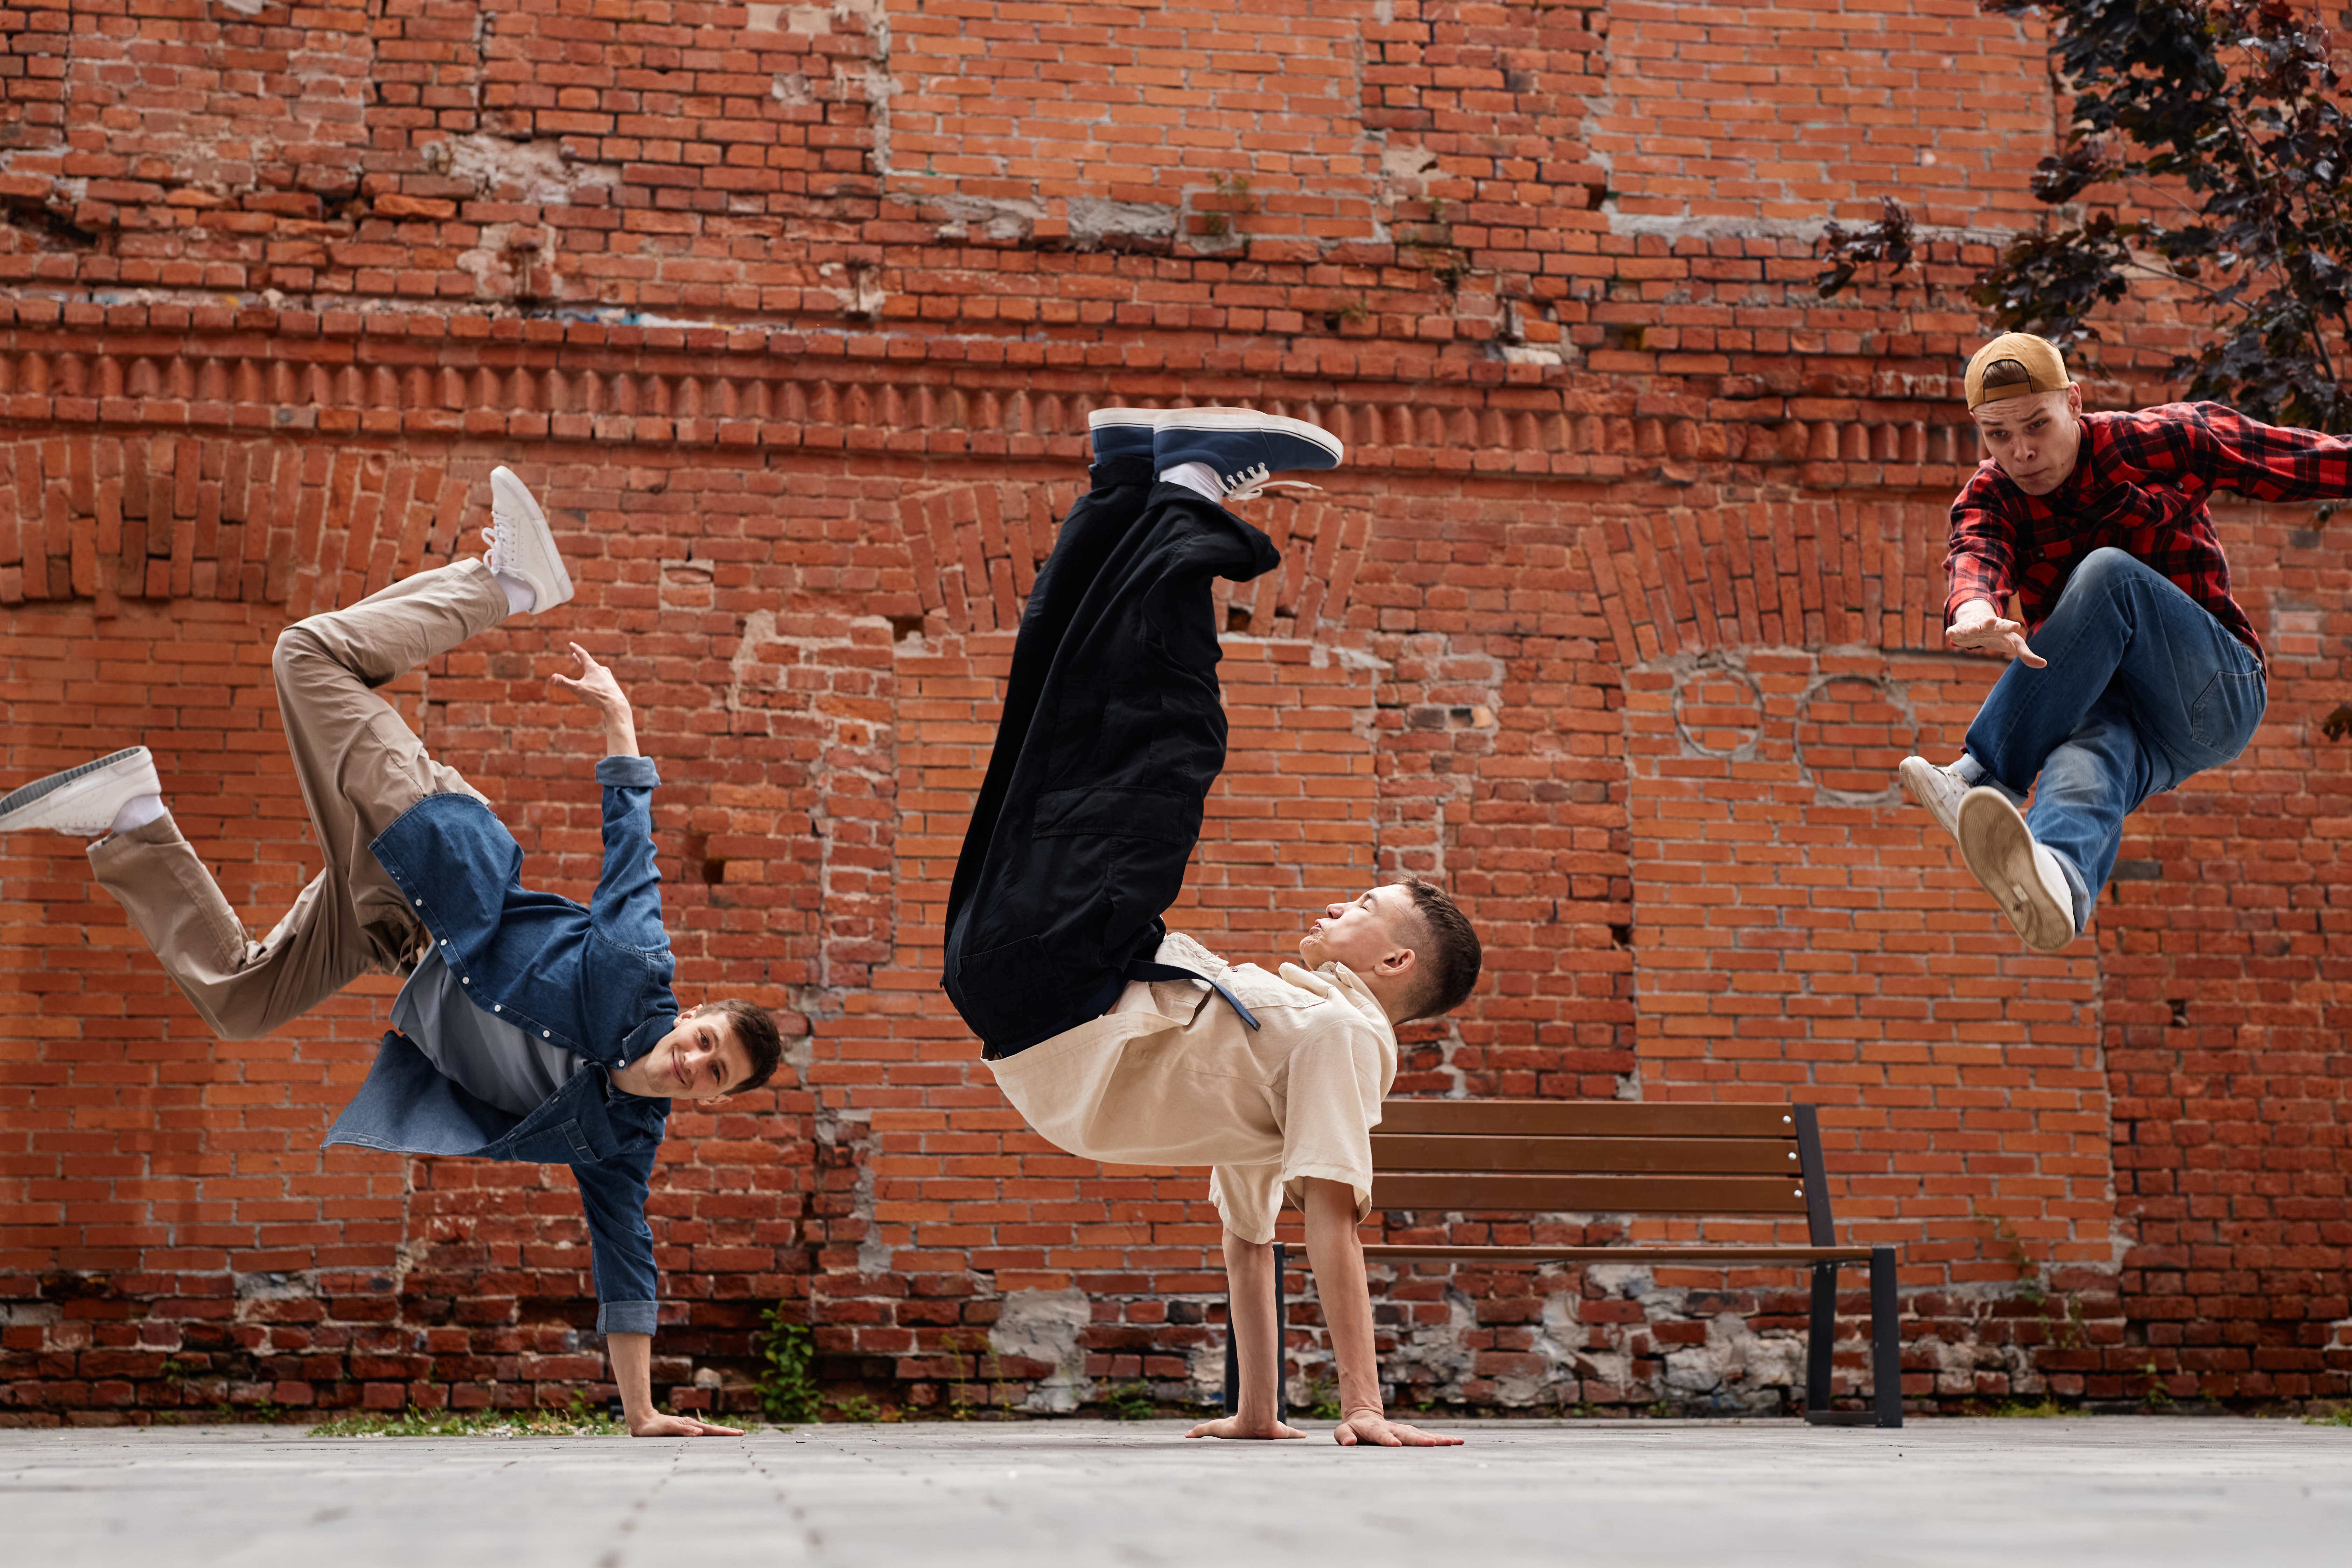 Break-dancing busts into the Olympics for the first time. Here's what
to expect in Paris.